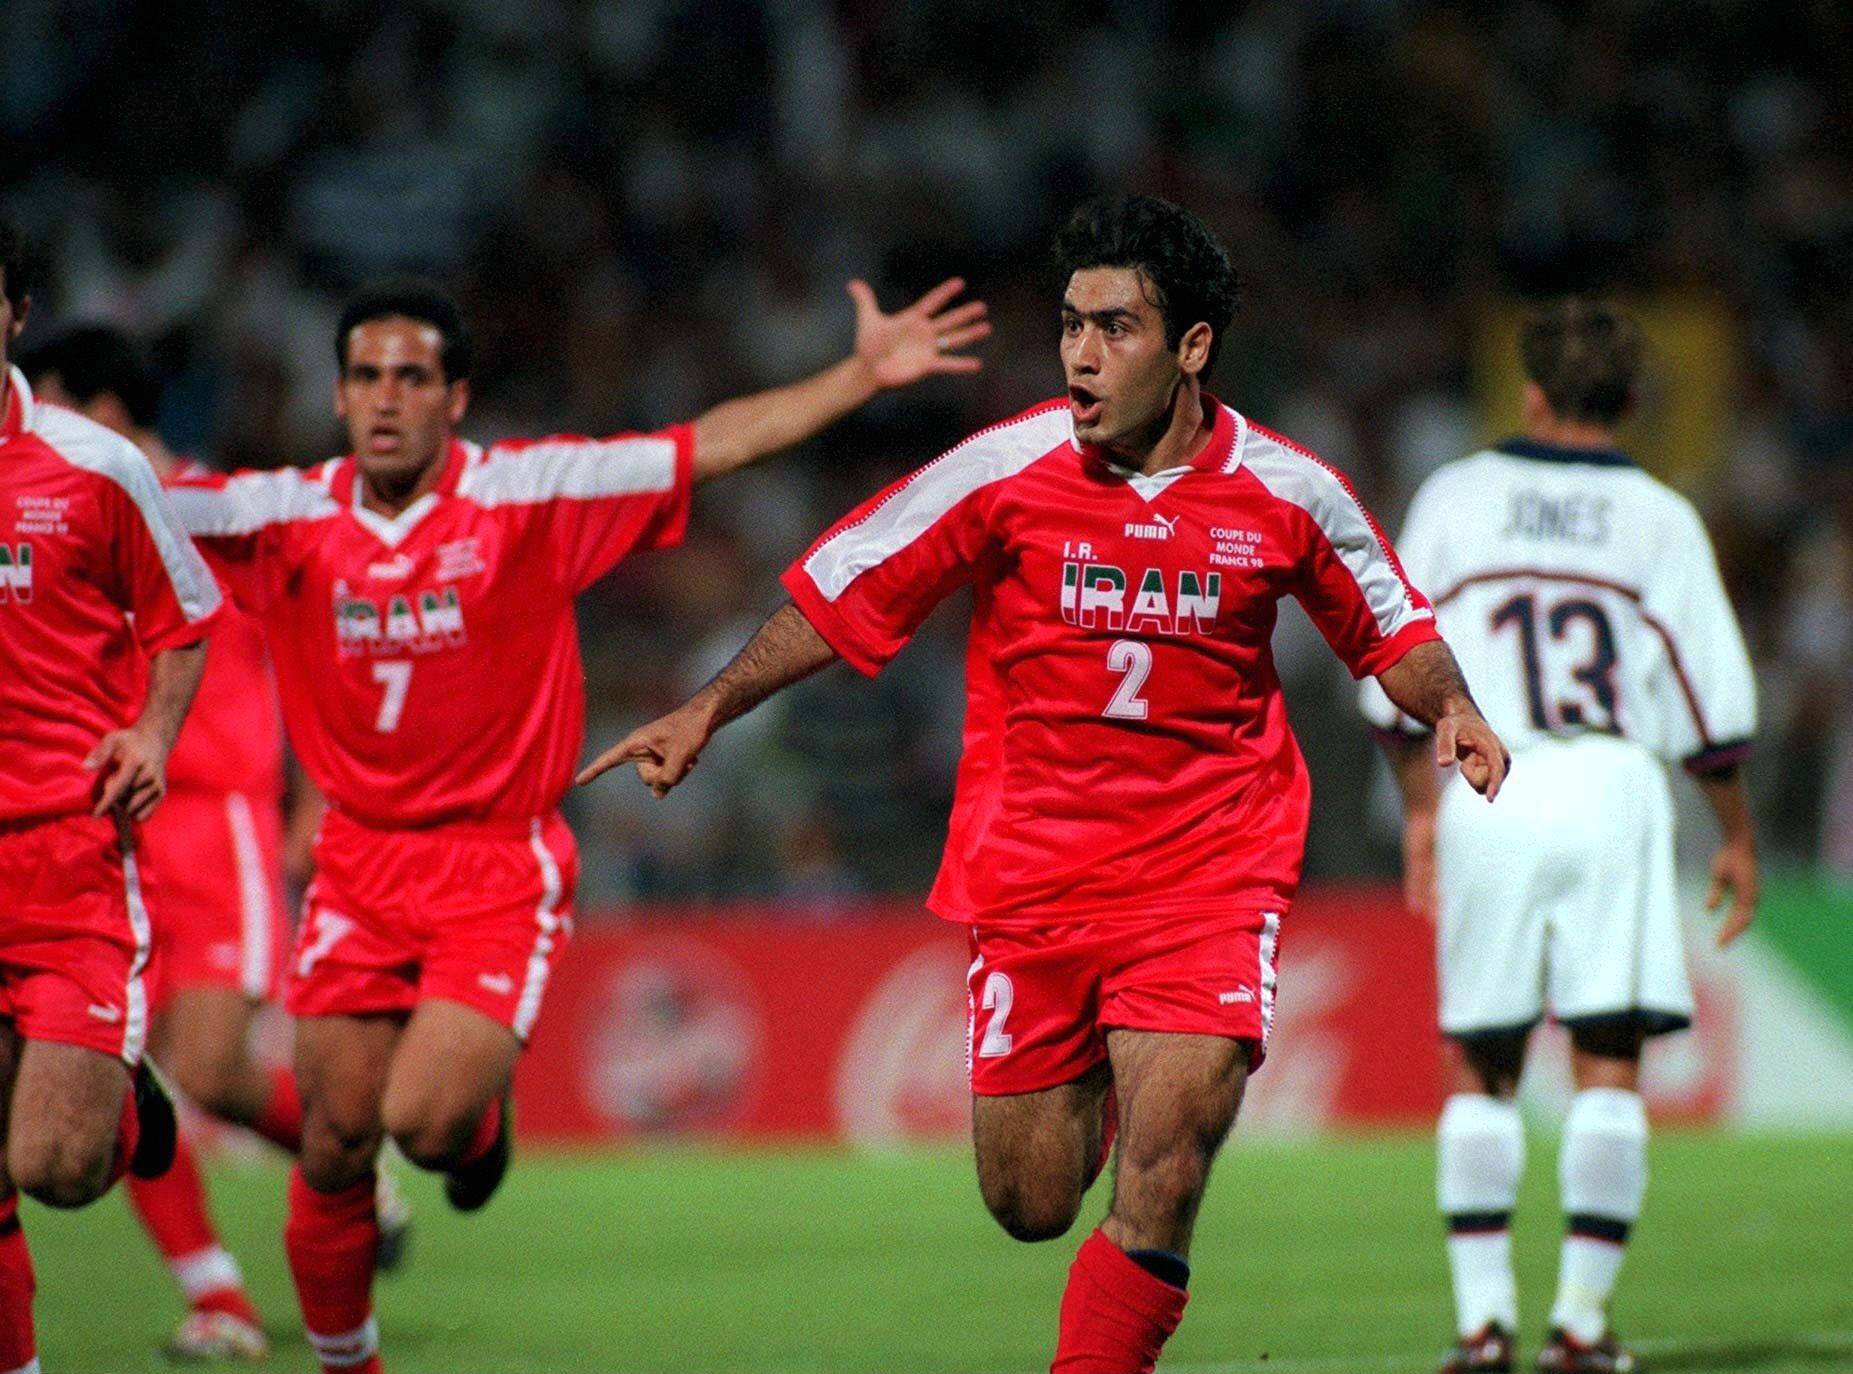 Iran legend Mahdavikia to Gol Bezan: 1998 side could have escaped group stage